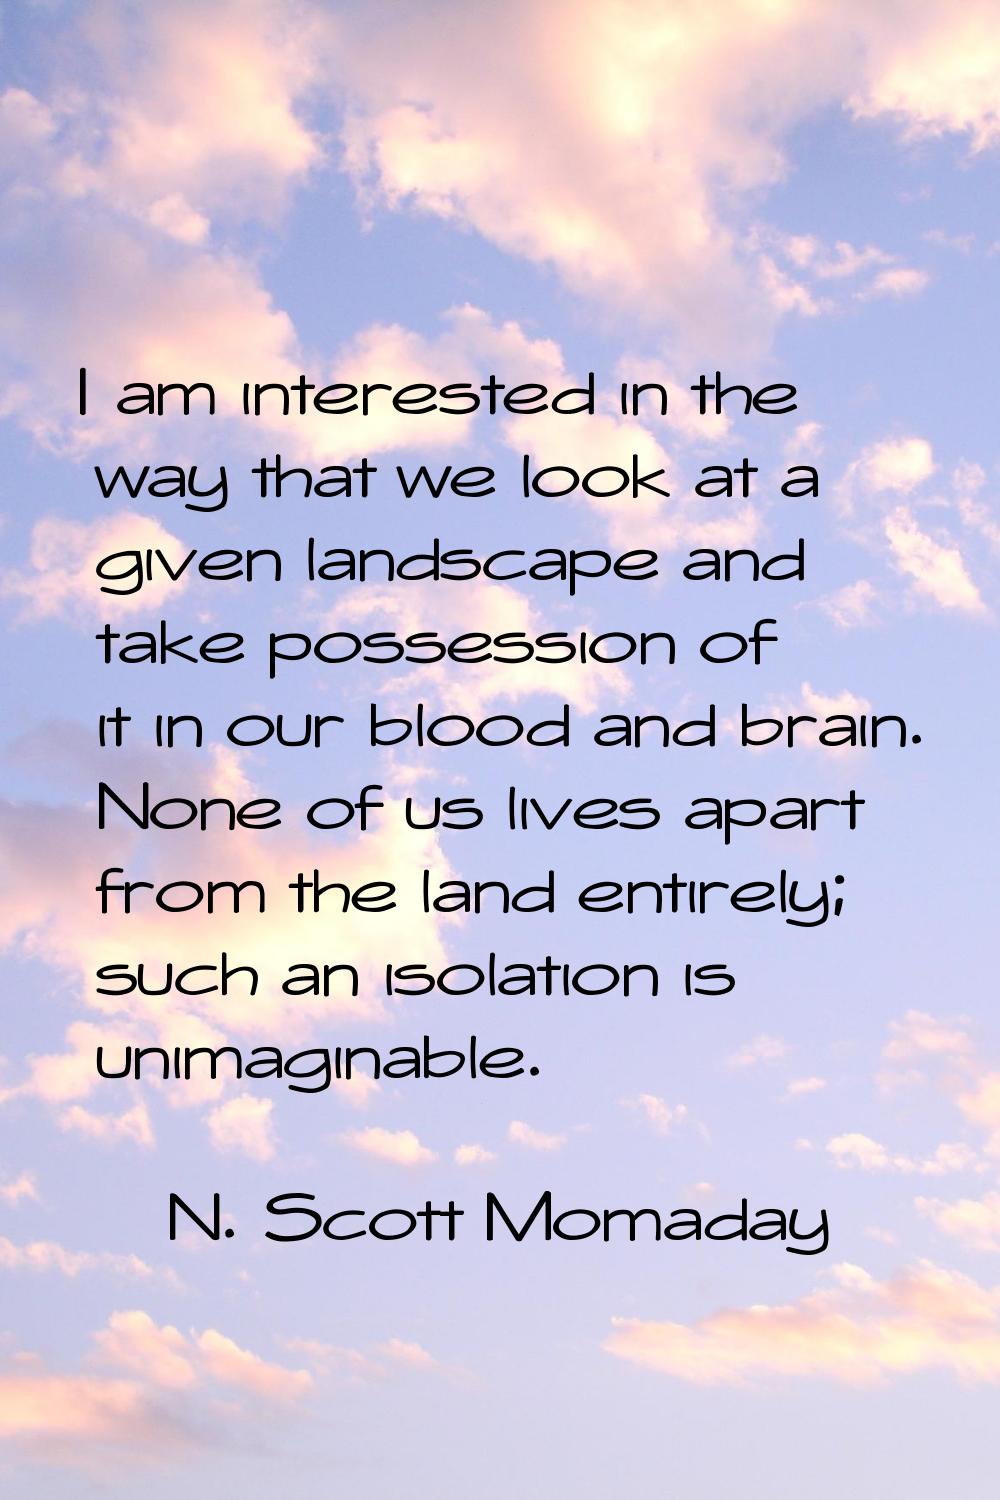 I am interested in the way that we look at a given landscape and take possession of it in our blood